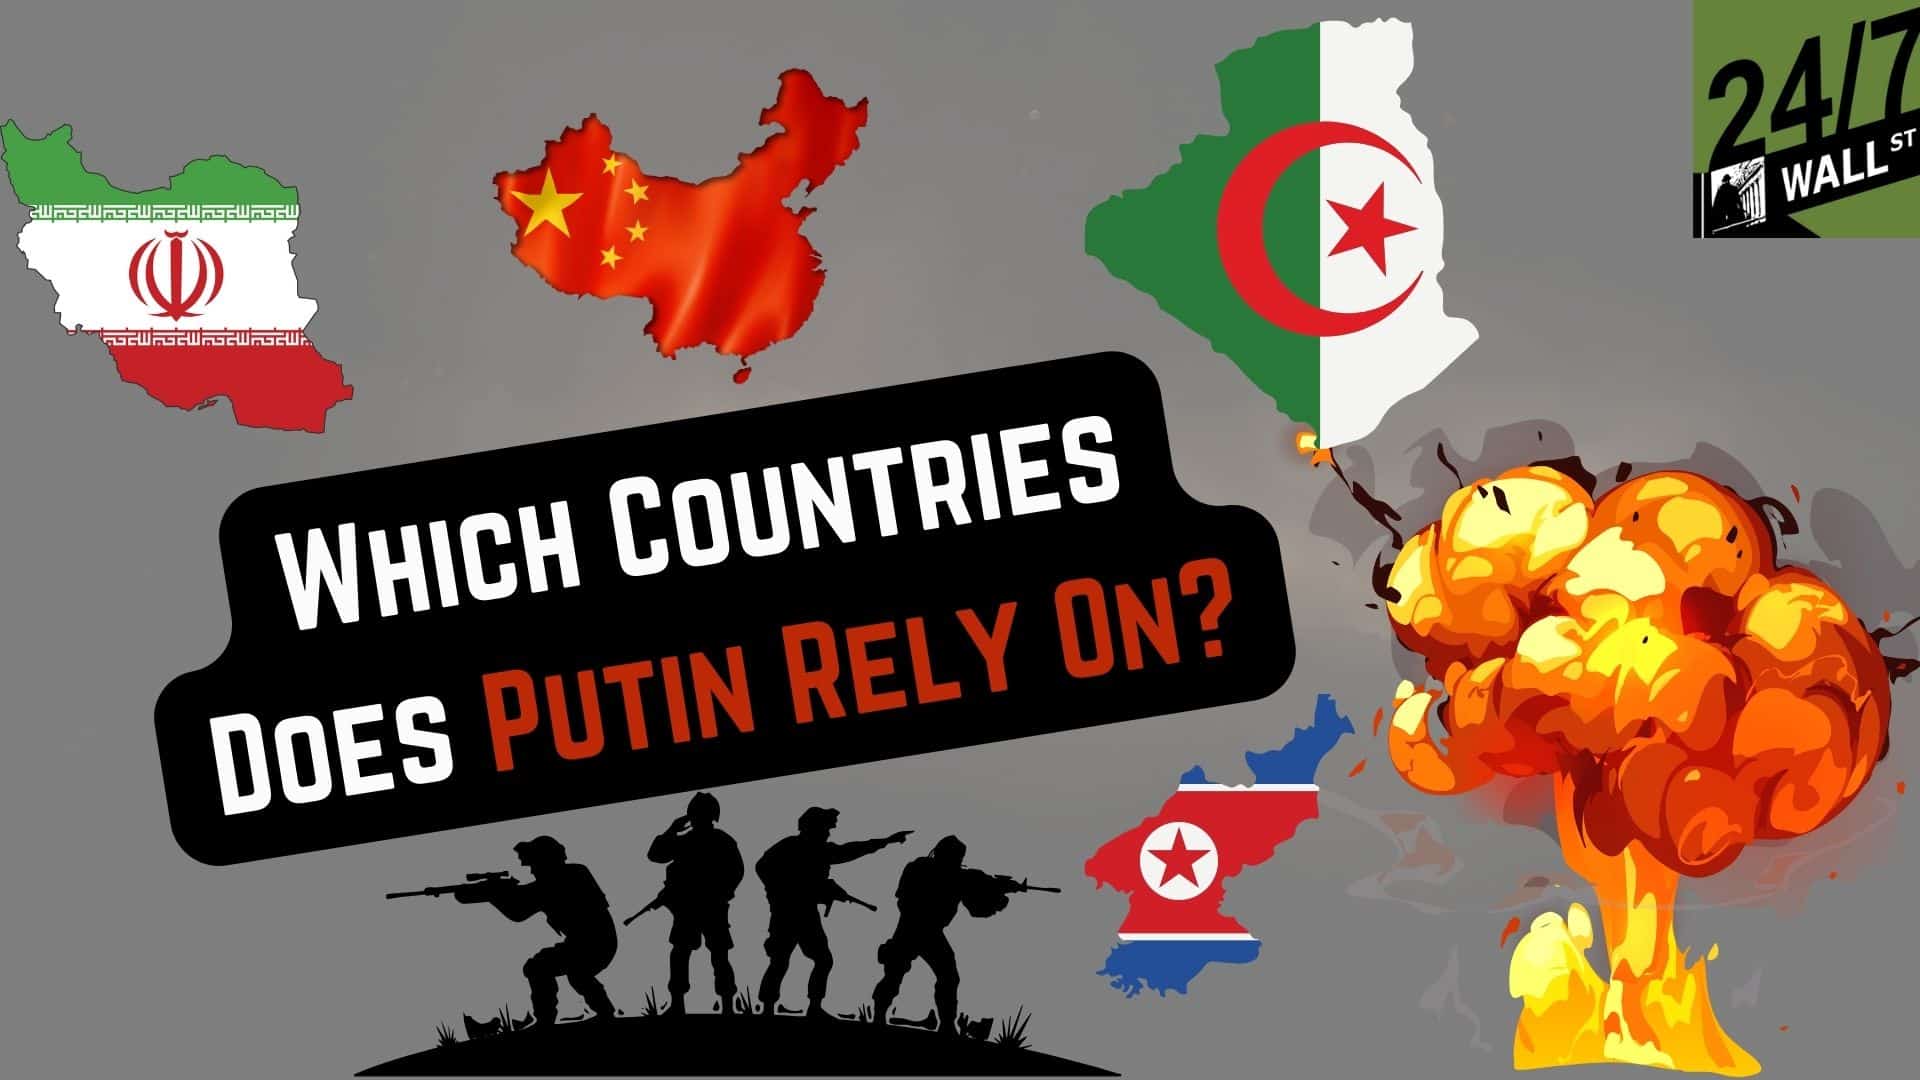 Which Countries Does Putin Rely On?